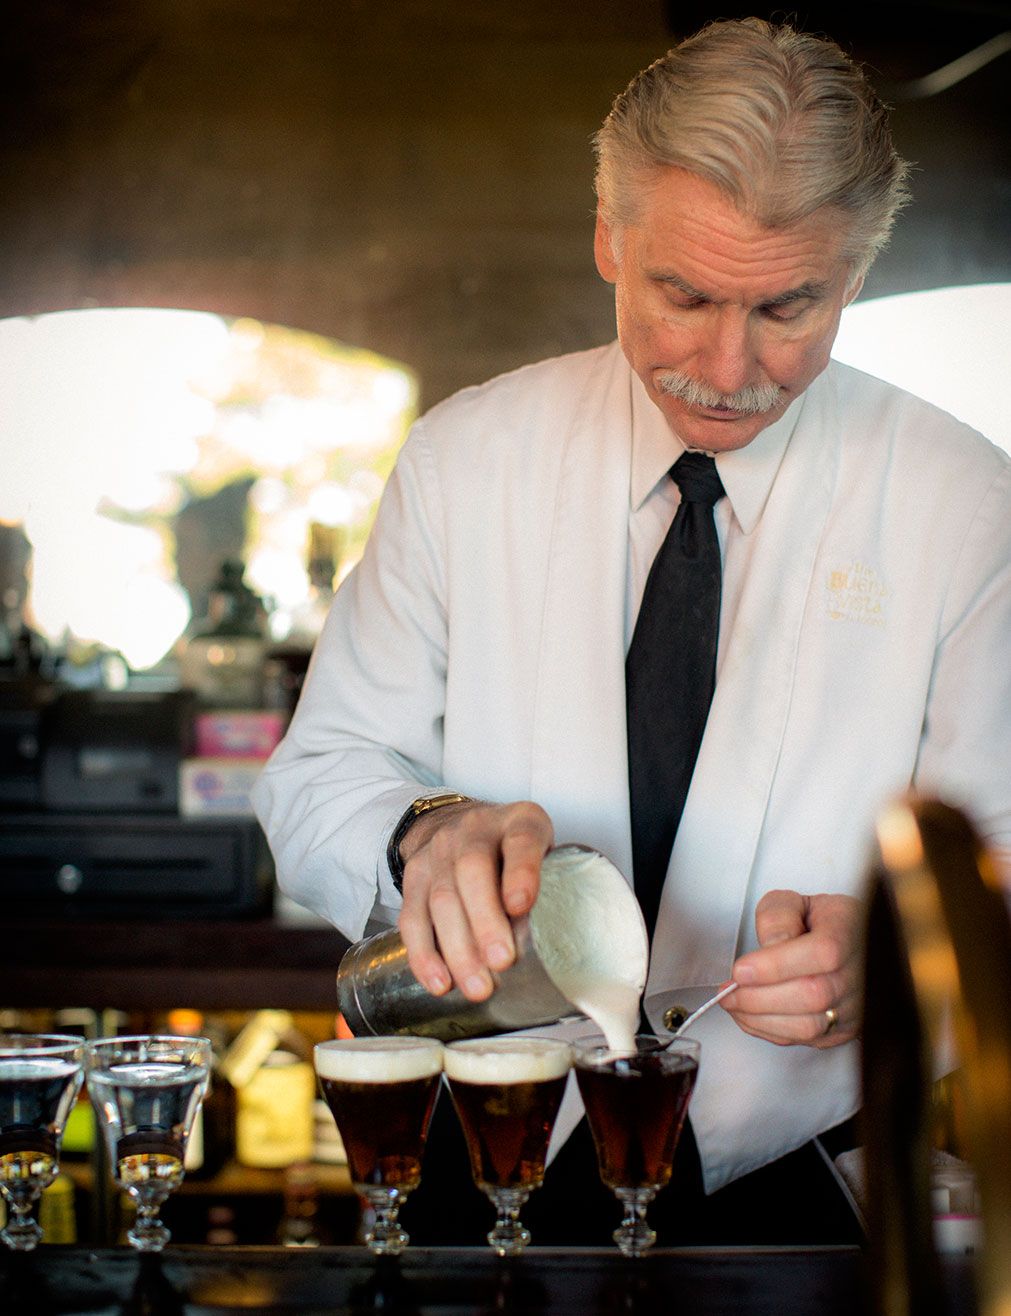 Larry Nolan has been topping Irish Coffees at the Buena Vista Cafe for over 40 years.